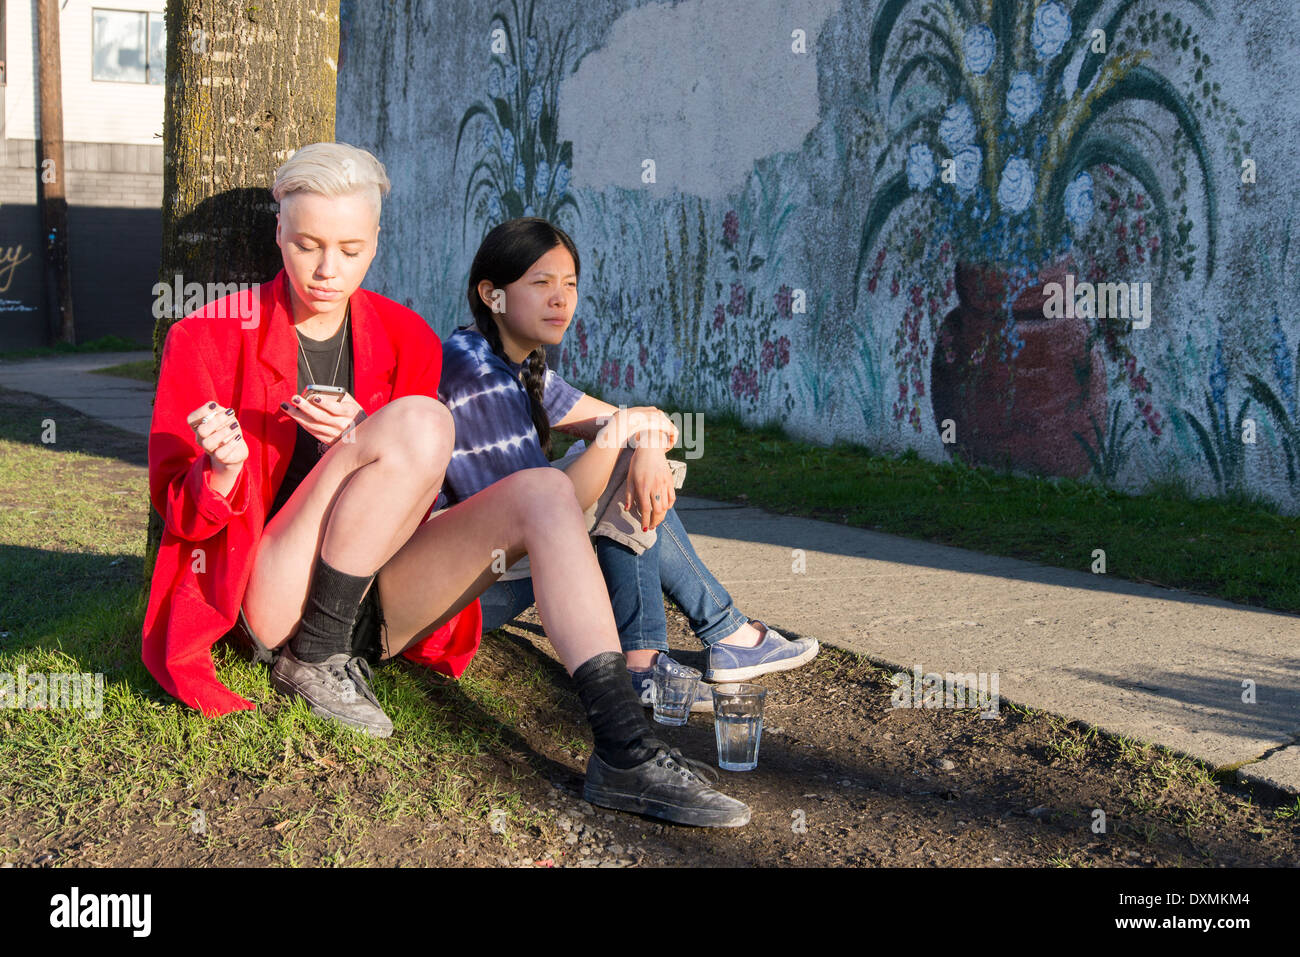 Young women taking a break from work, Vancouver, British Columbia, Canada Stock Photo